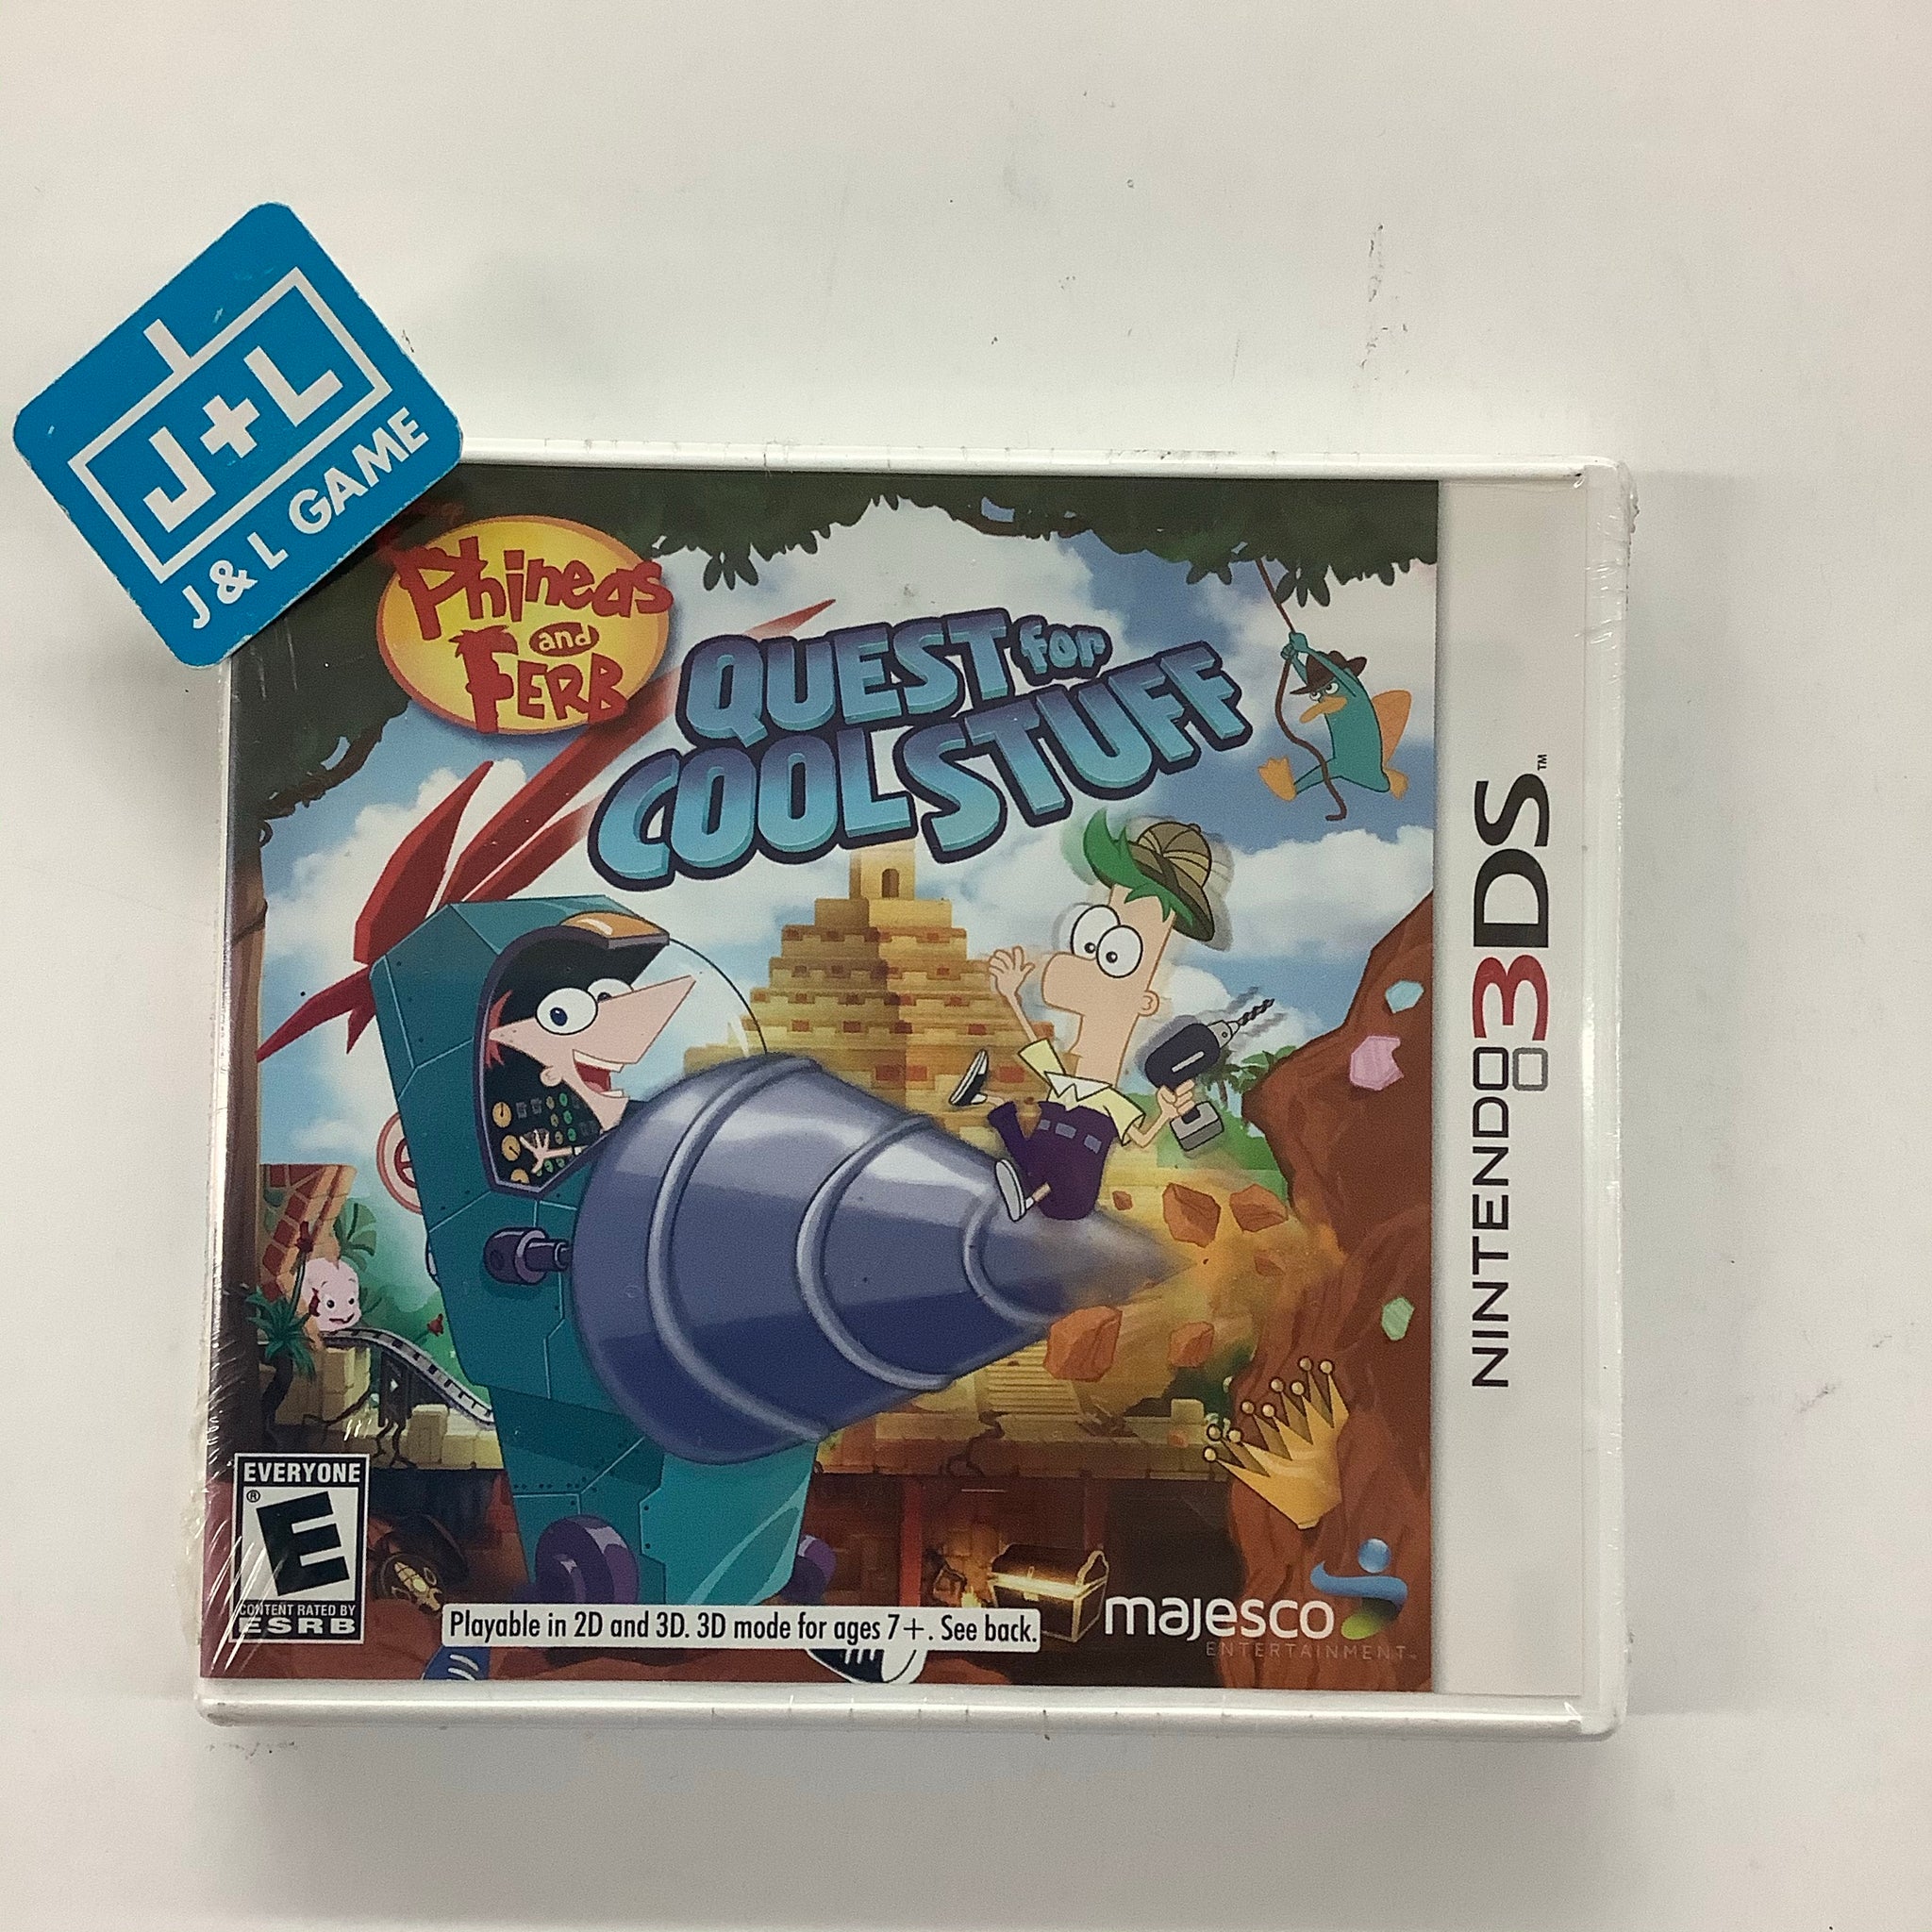 Phineas and Ferb: Quest for Cool Stuff - Nintendo 3DS Video Games Majesco   